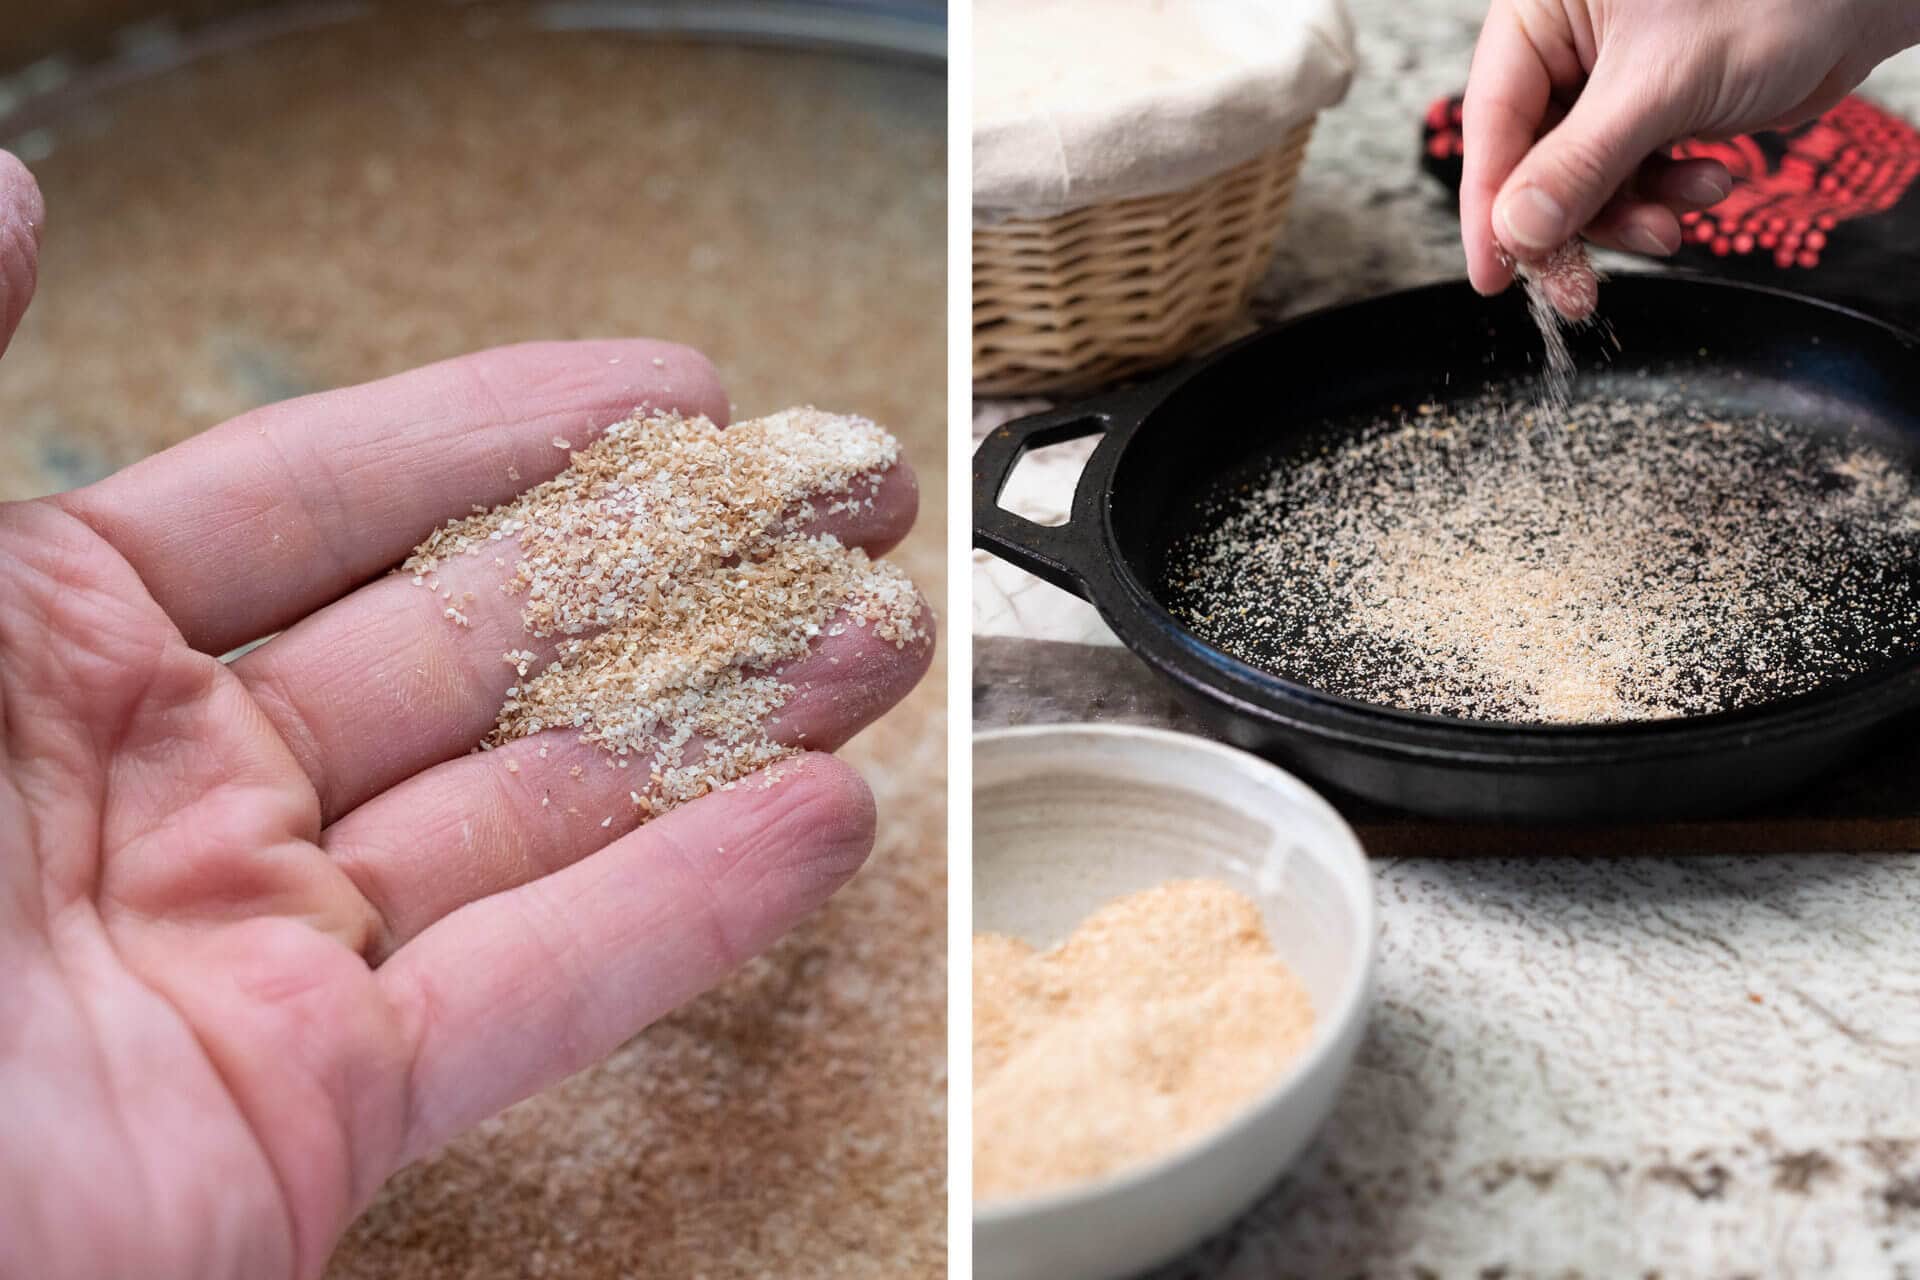 Using sifted wheat bran or germ to insulate the bottom of bread dough to prevent burning.